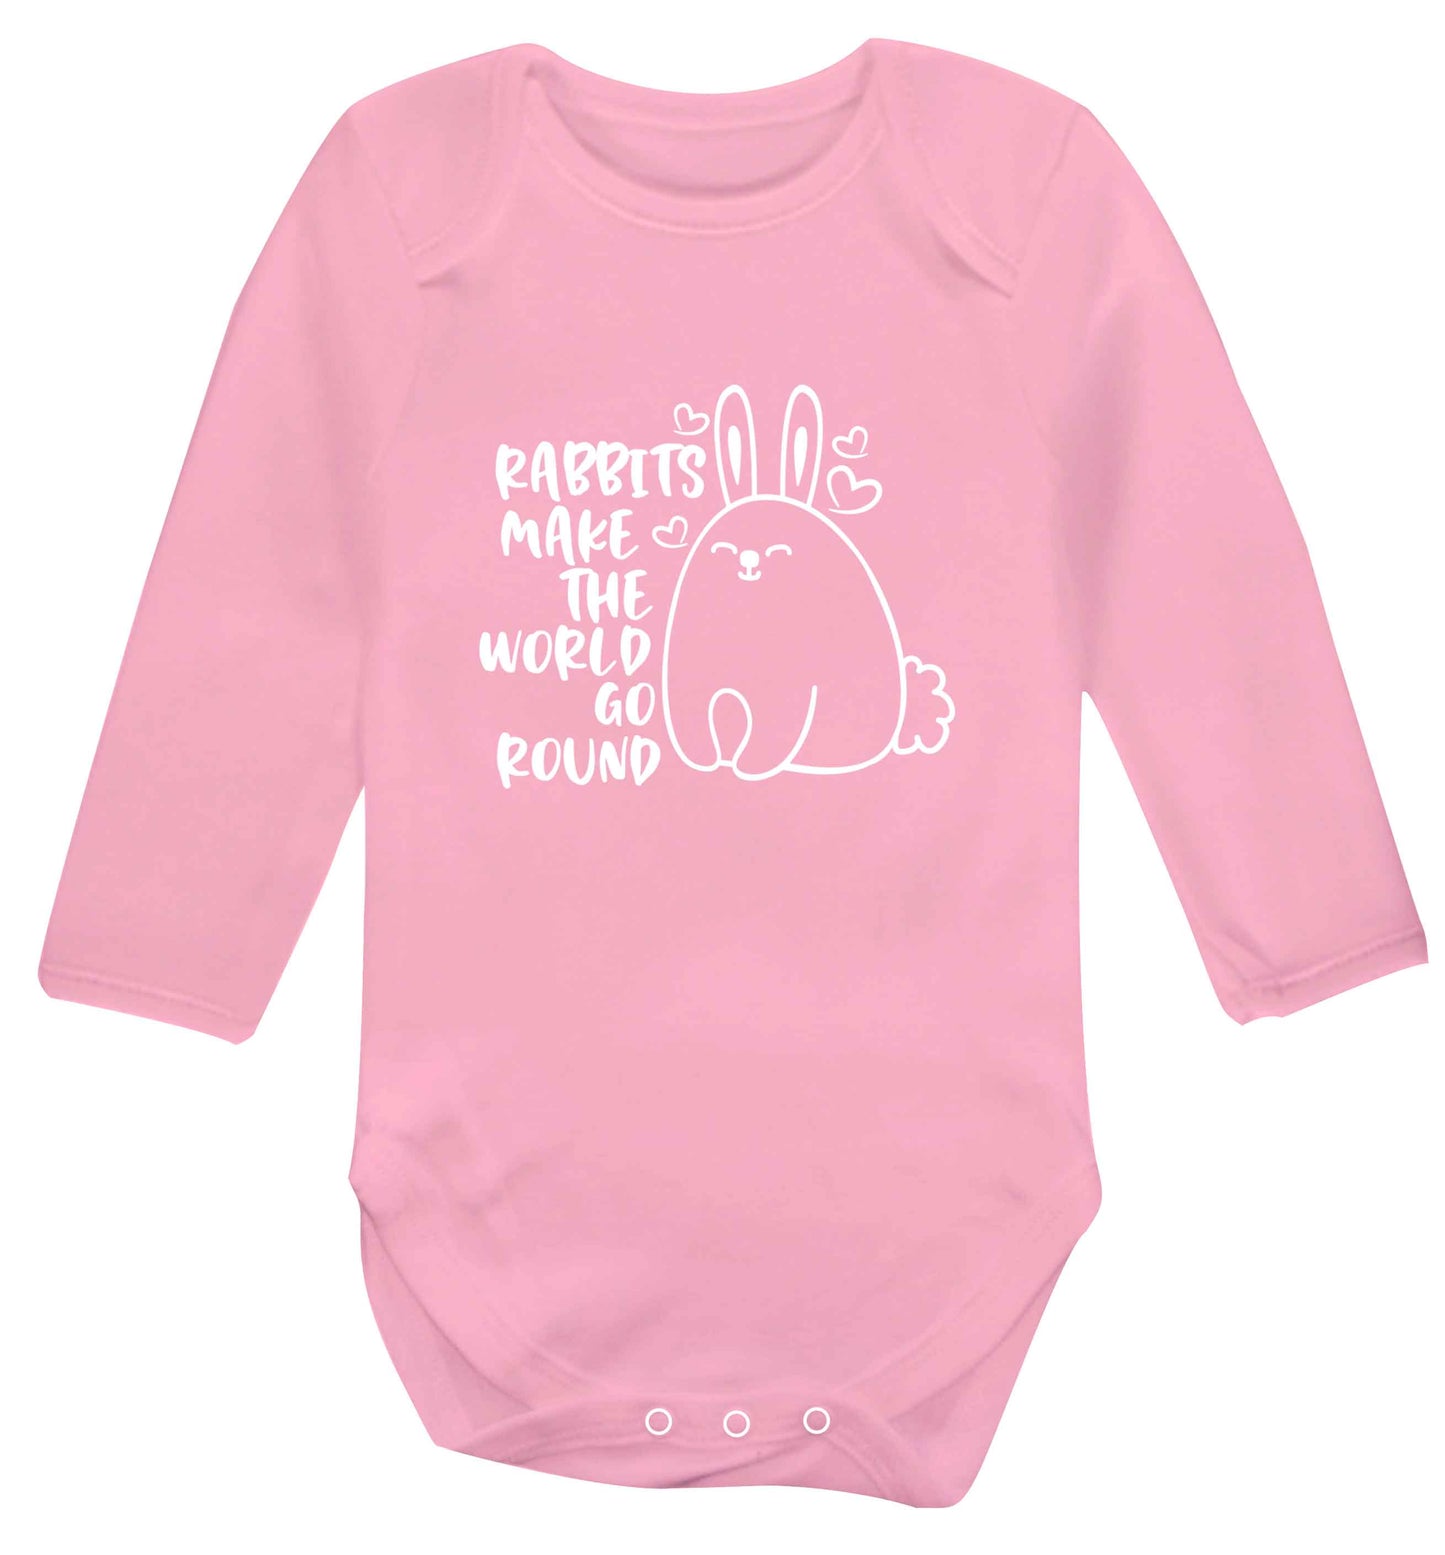 Rabbits make the world go round baby vest long sleeved pale pink 6-12 months